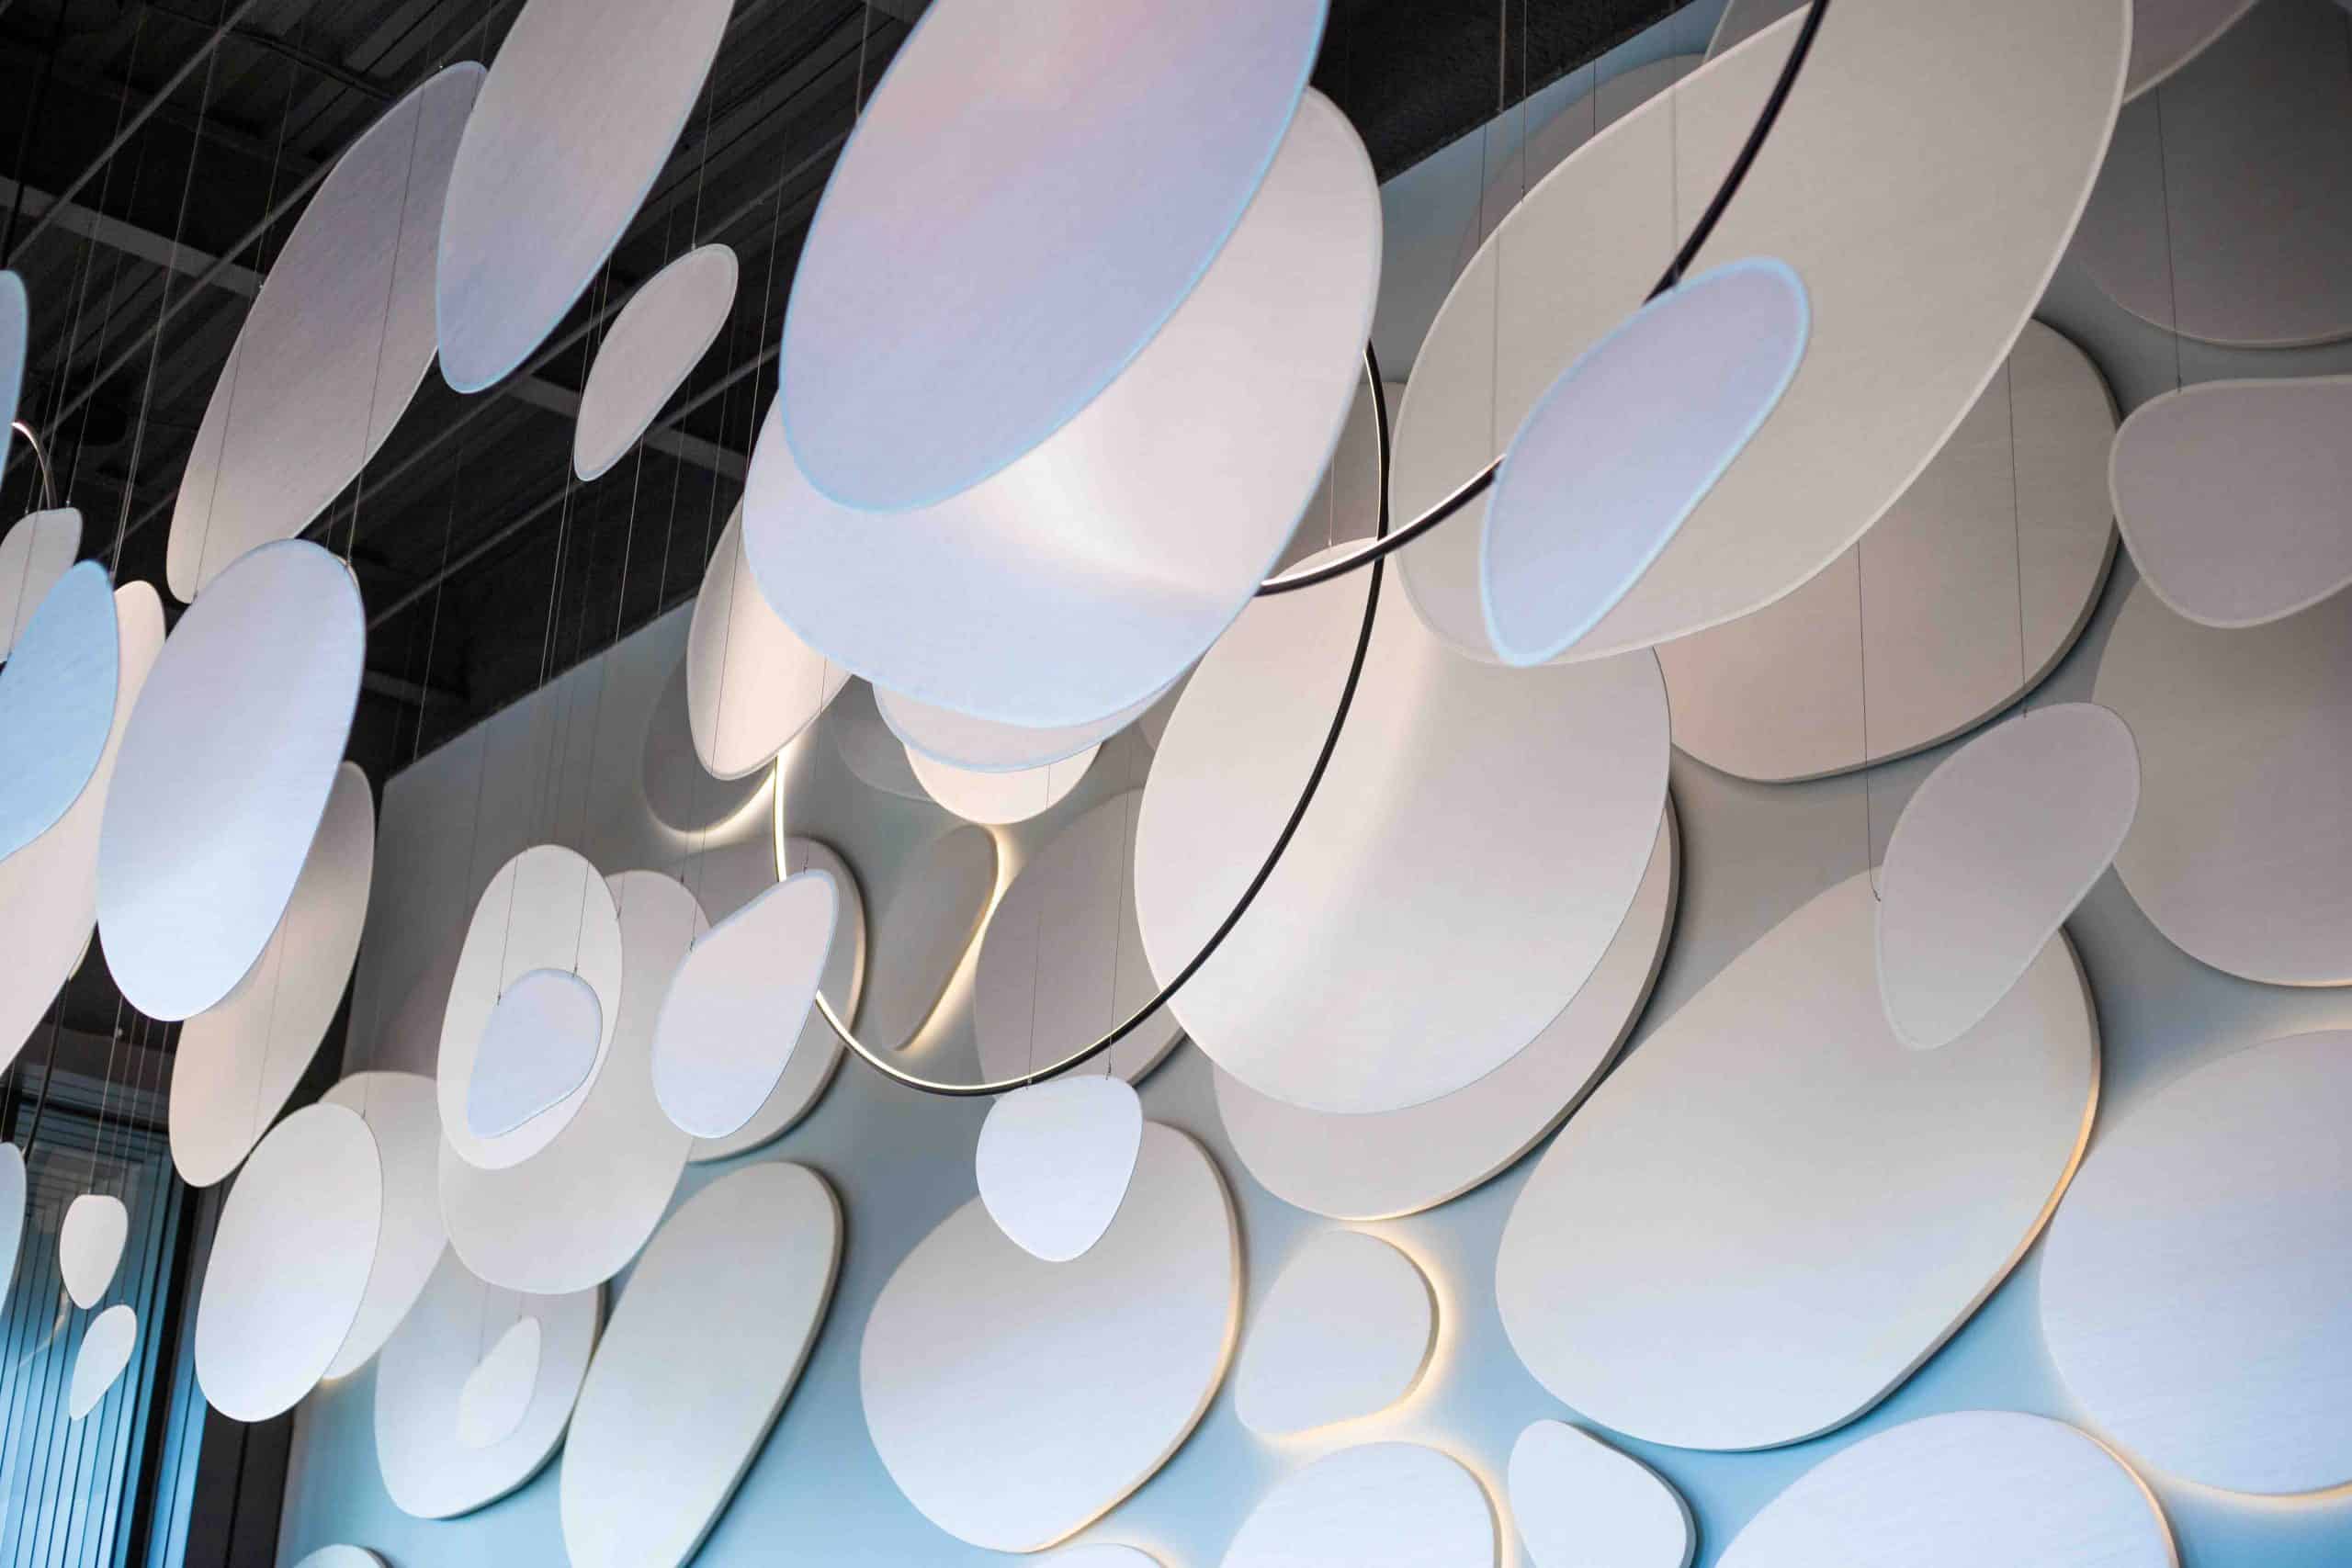 Illuminated bubble elements for sculptural wall graphic to lobby